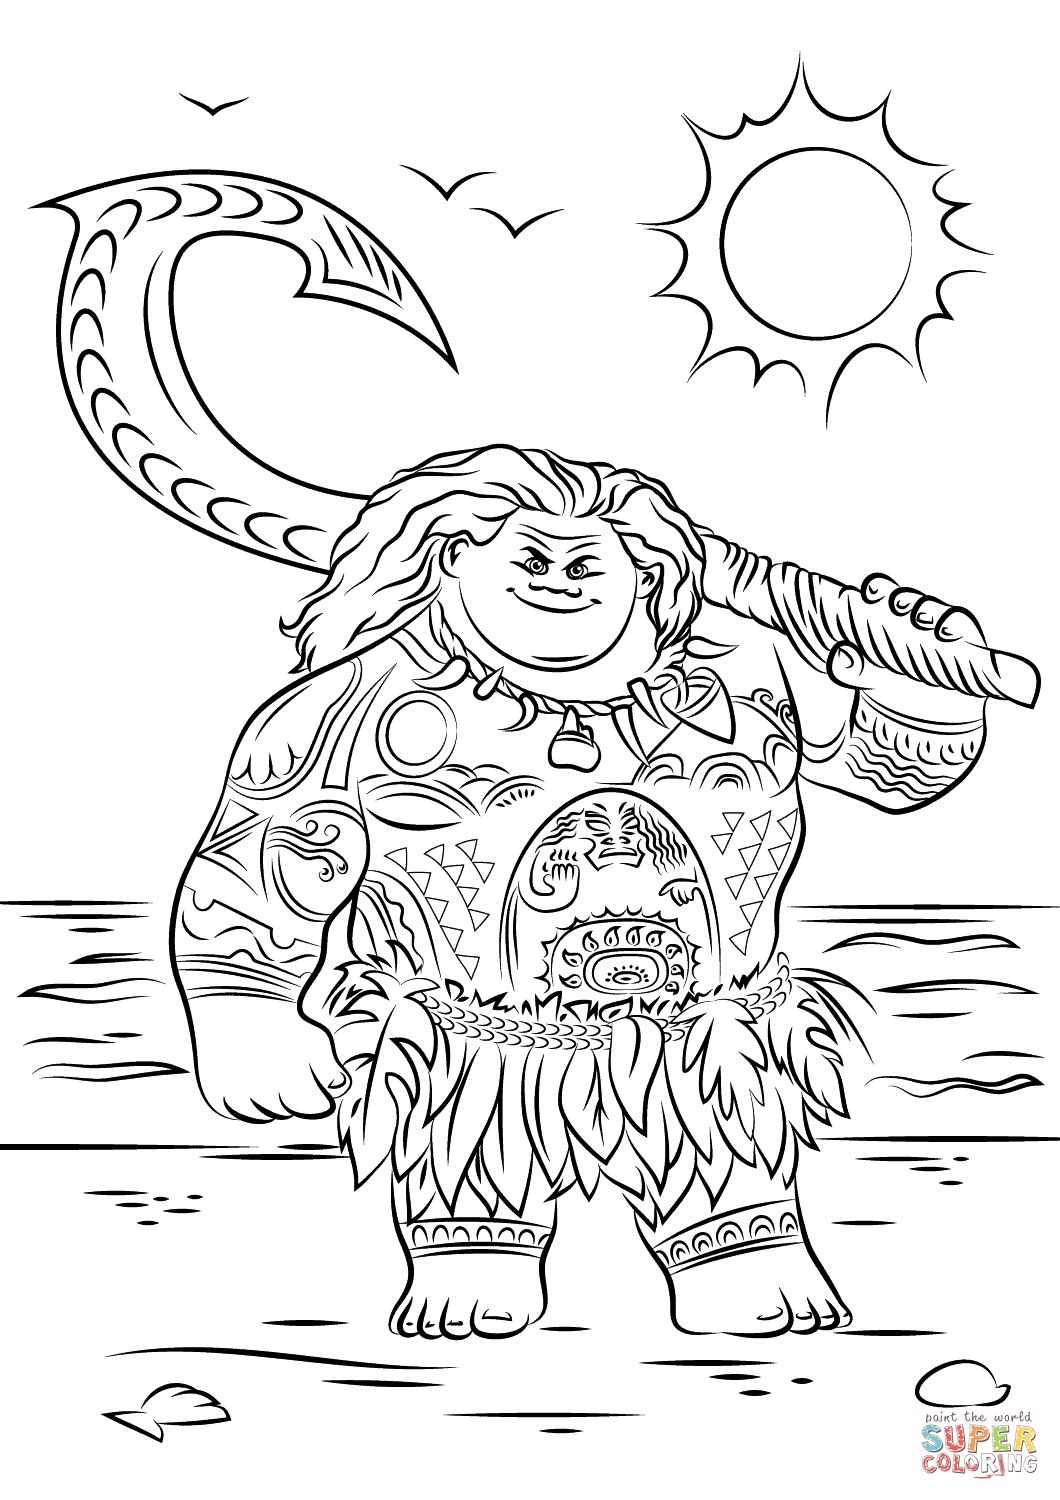 Maui from Moana coloring page | Free Printable Coloring Pages